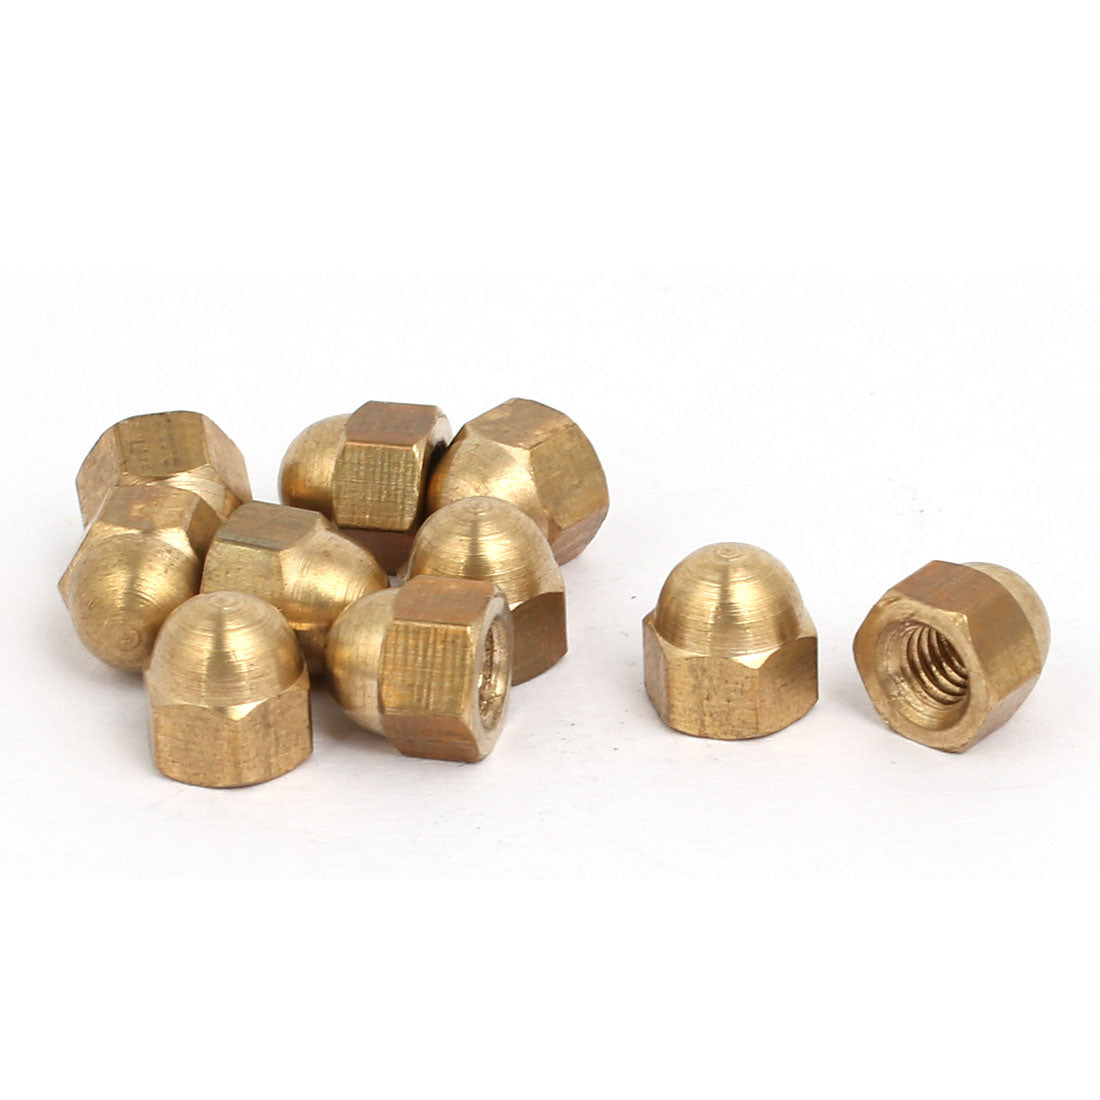 uxcell Uxcell 10pcs M4 Female Thread Nut DIN1587 Dome Cap Head Hex Brass Tone